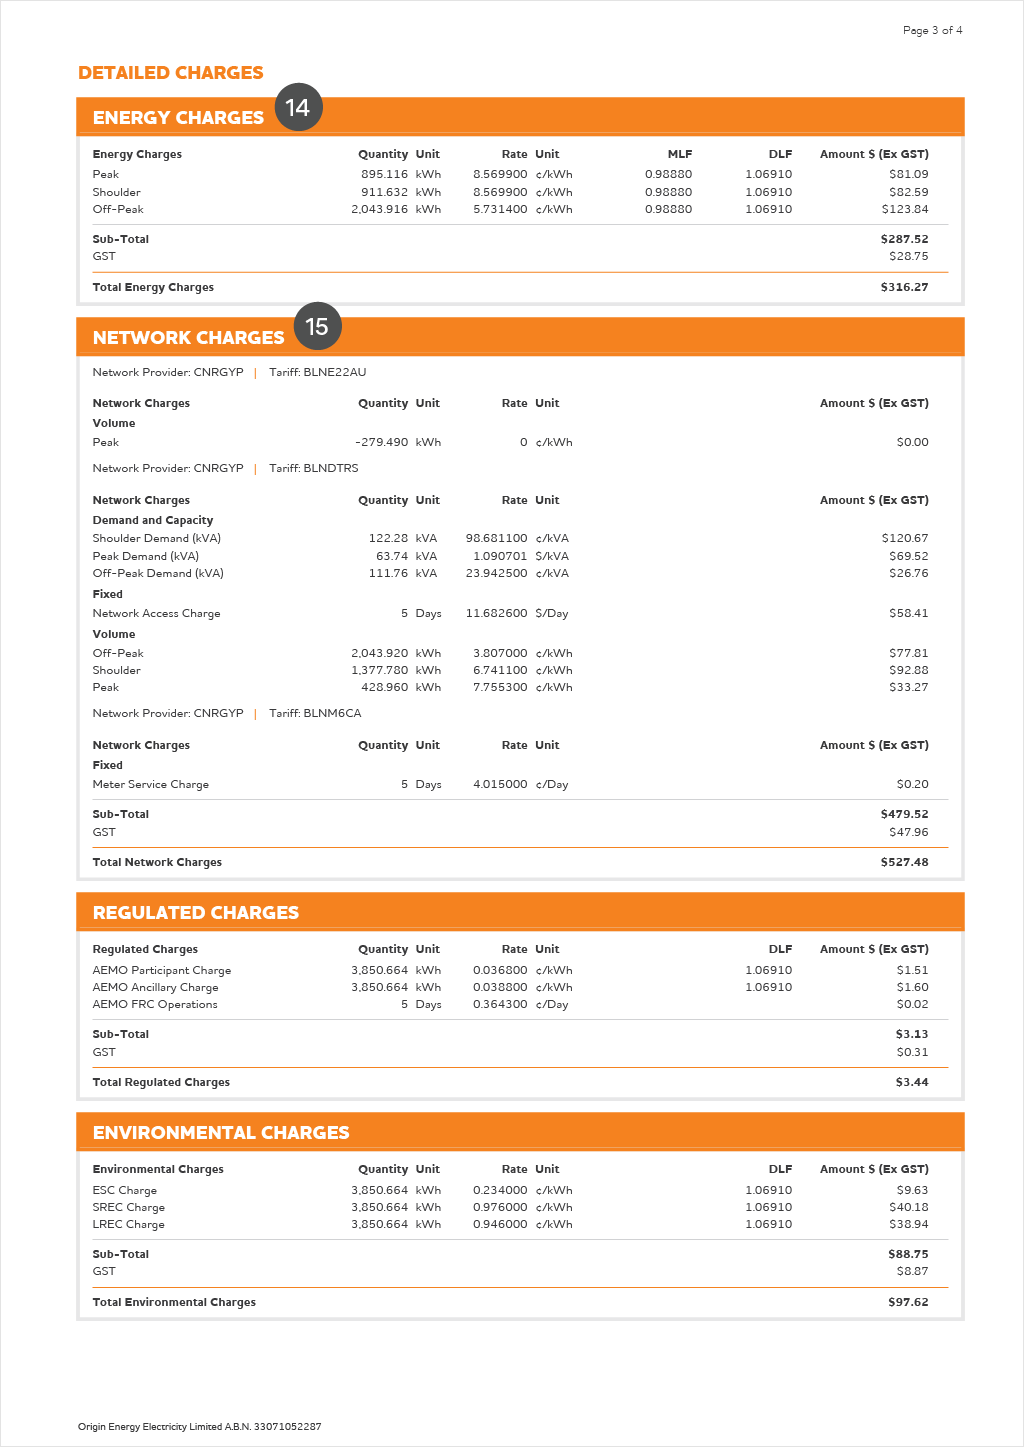 Page 3 of Origin commercial electricity bill